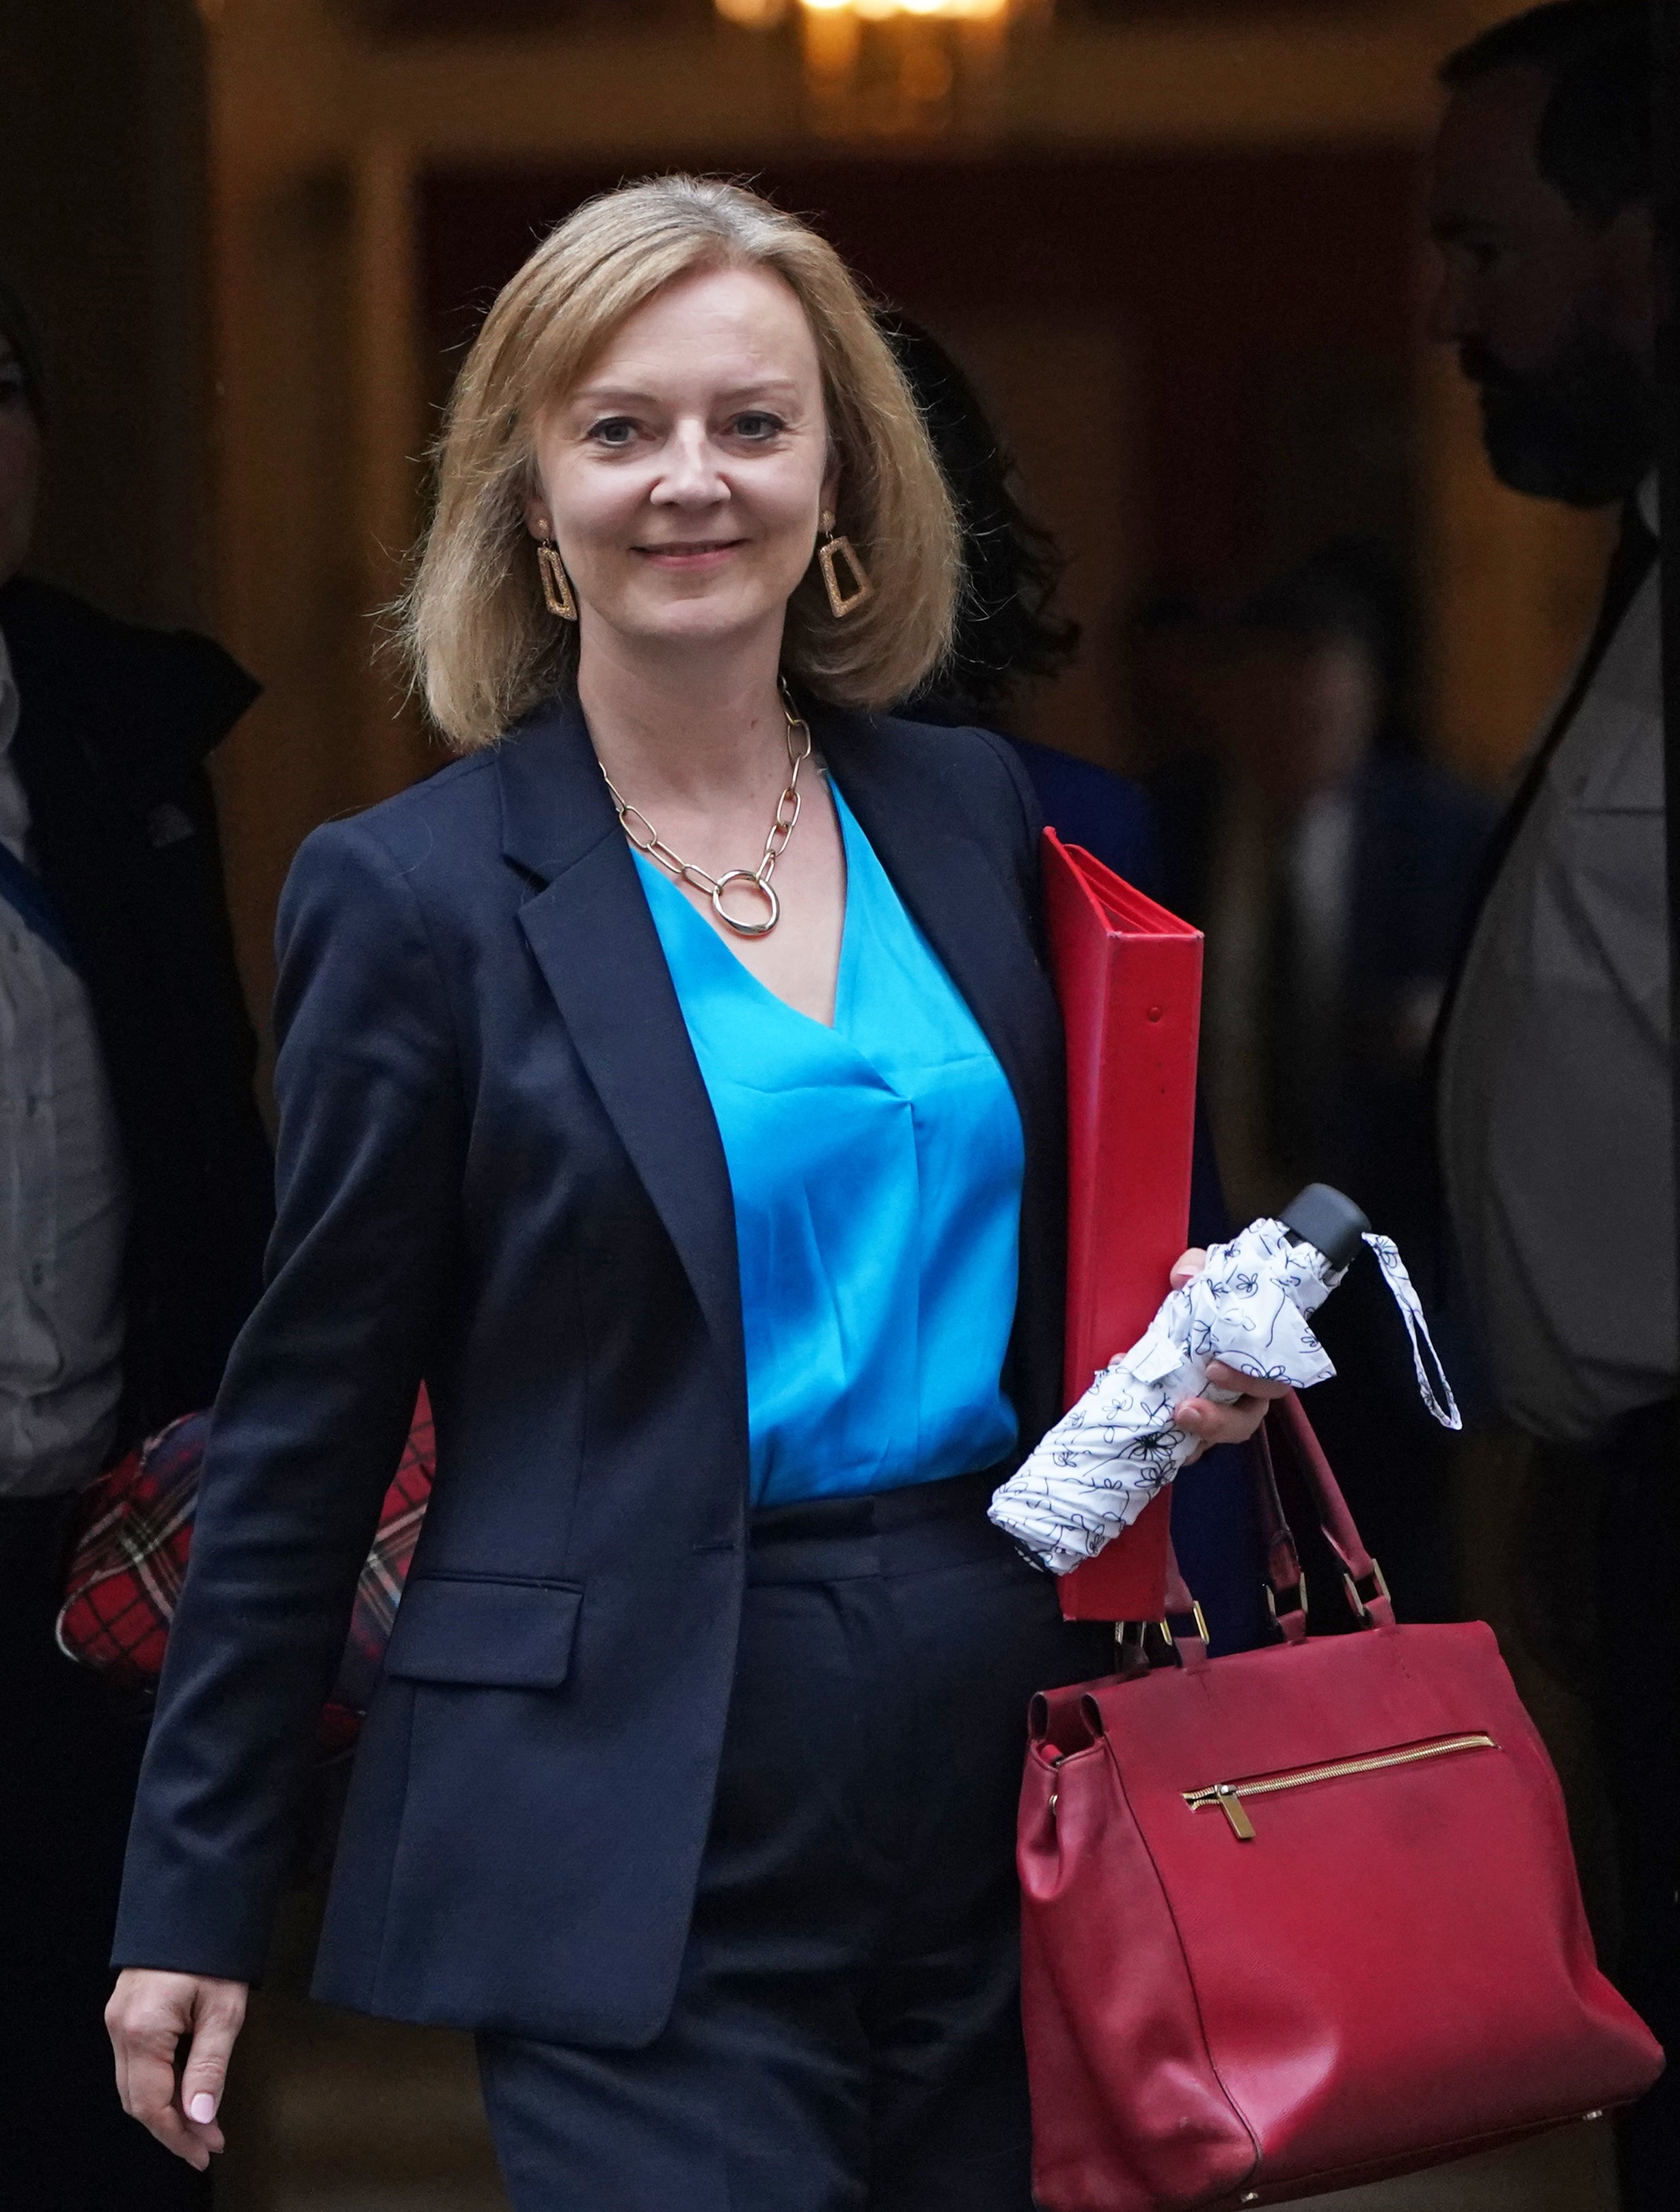 Liz Truss says the UK Government wants ‘deeper links’ in trade areas (Victoria Jones/PA)